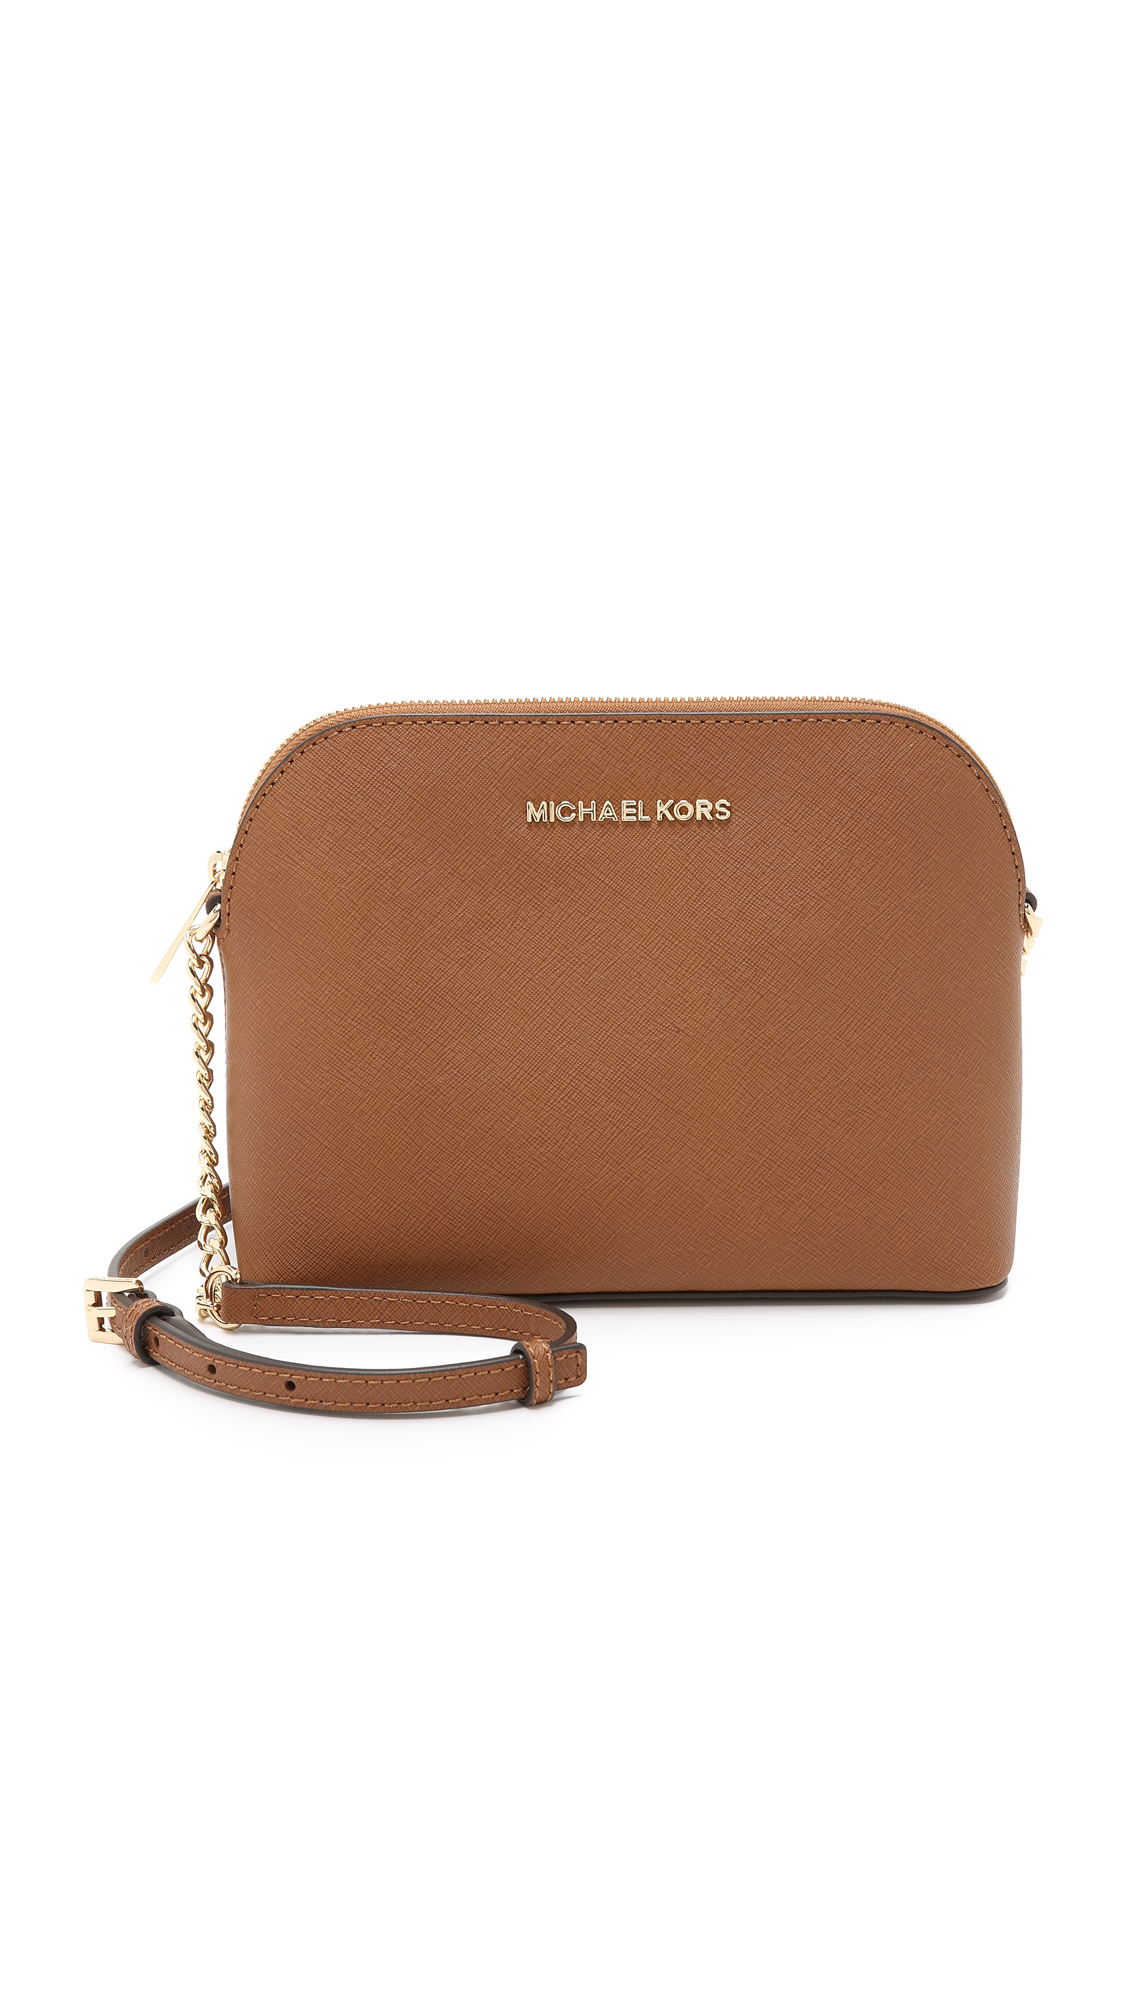 MICHAEL Michael Kors Leather Cindy Dome Cross Body in Brown - Lyst